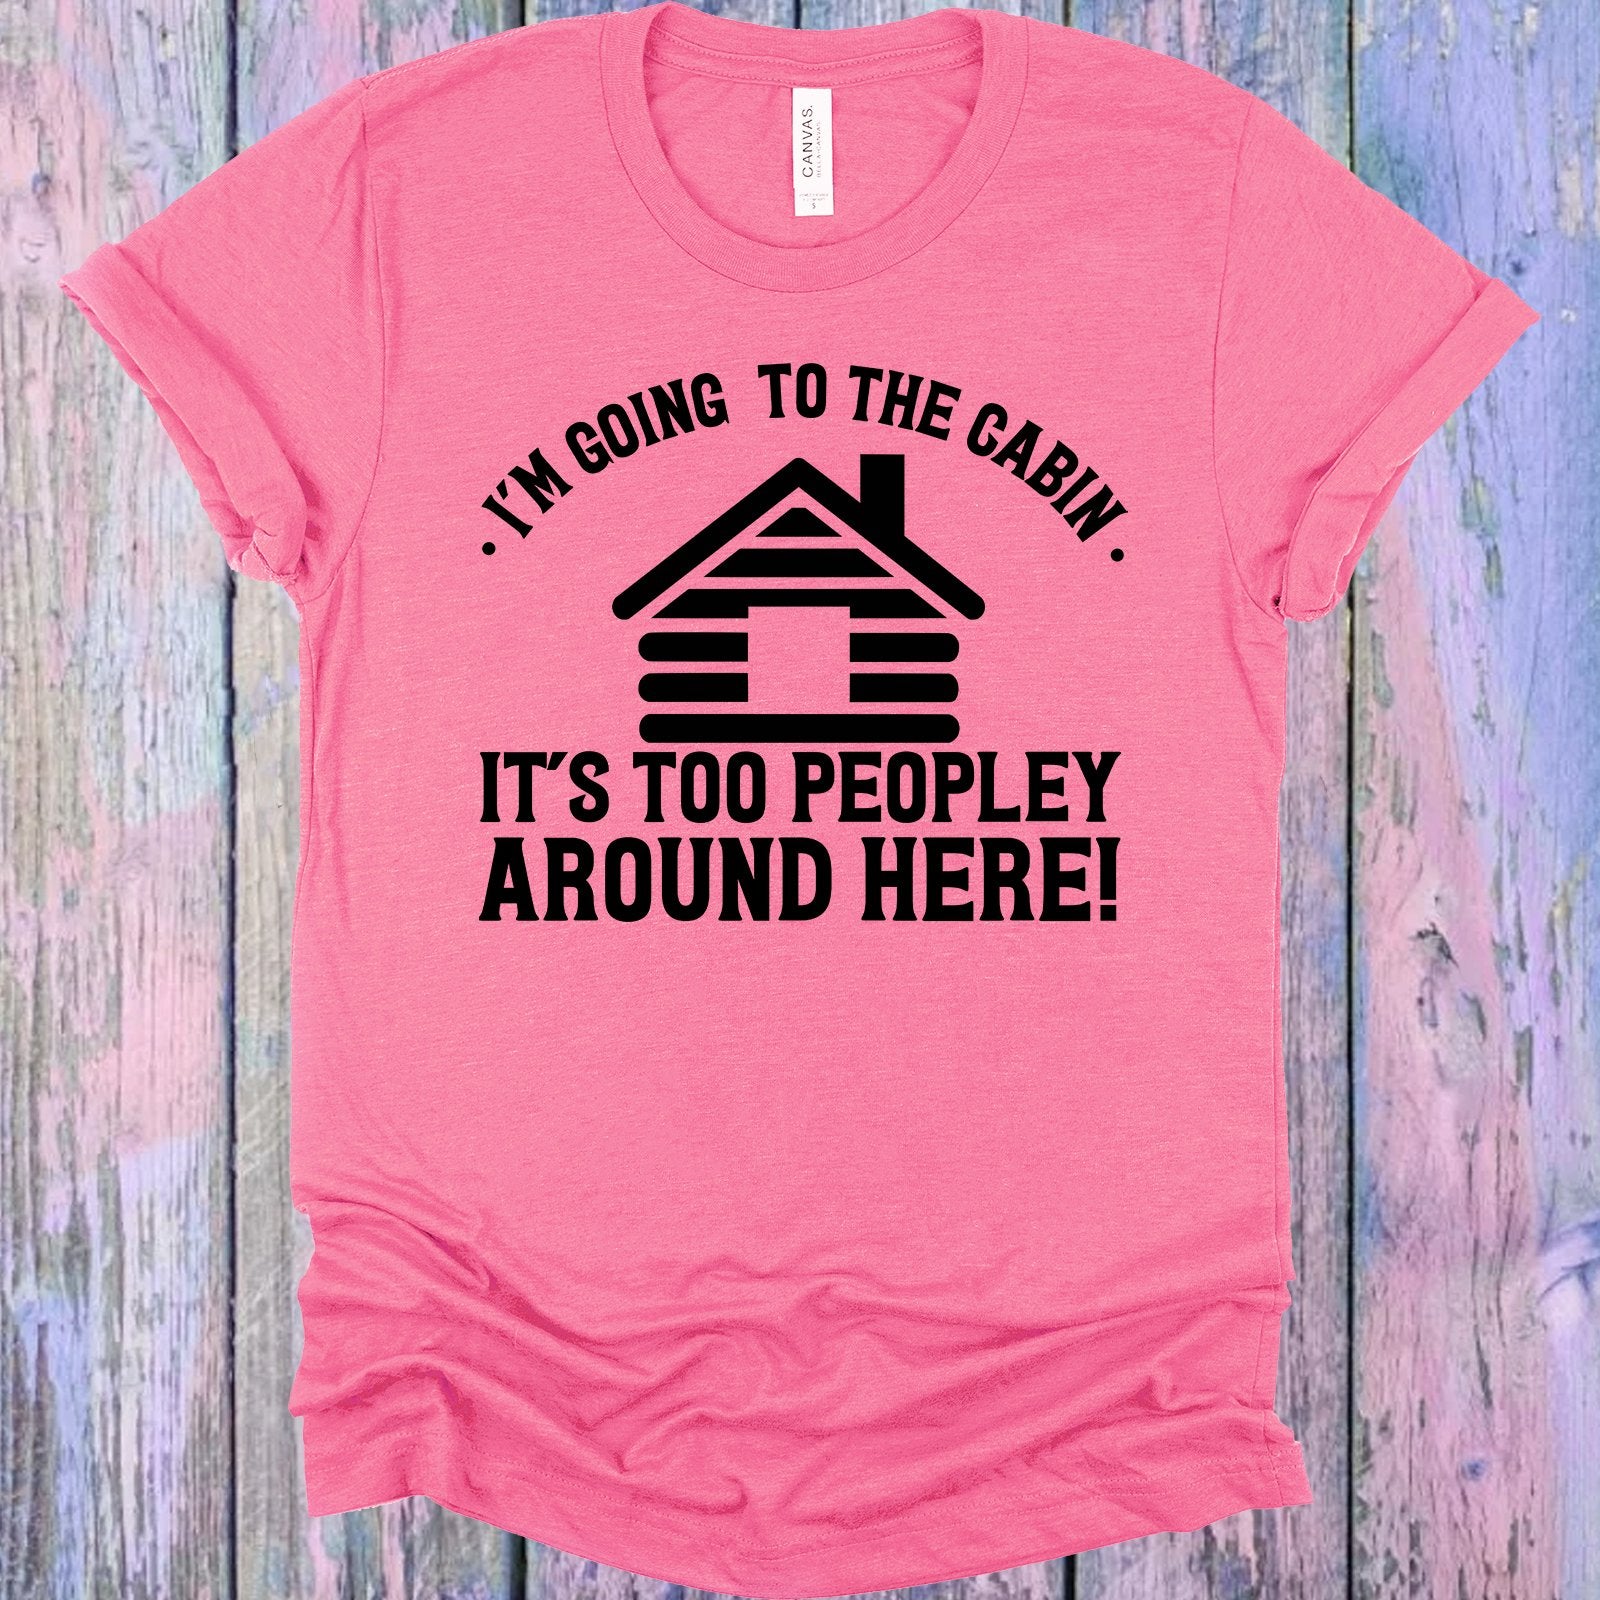 Im Going To The Cabin Graphic Tee Graphic Tee